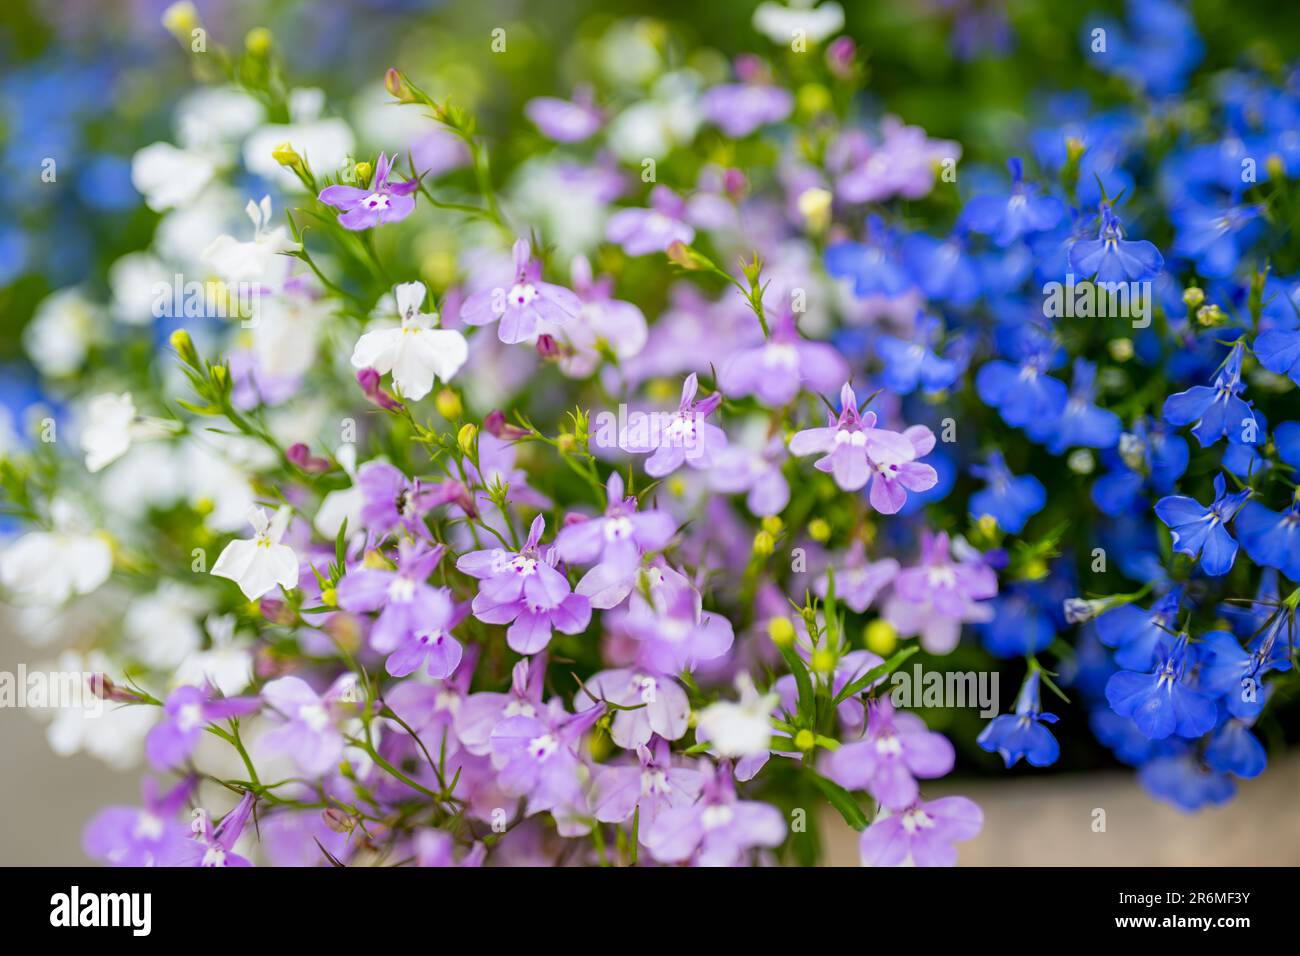 Colourful lobelia erinus flowers blossoming in a flowet pot in a garden. Garden lobelia, popular edging plant in gardens for hanging baskets and windo Stock Photo